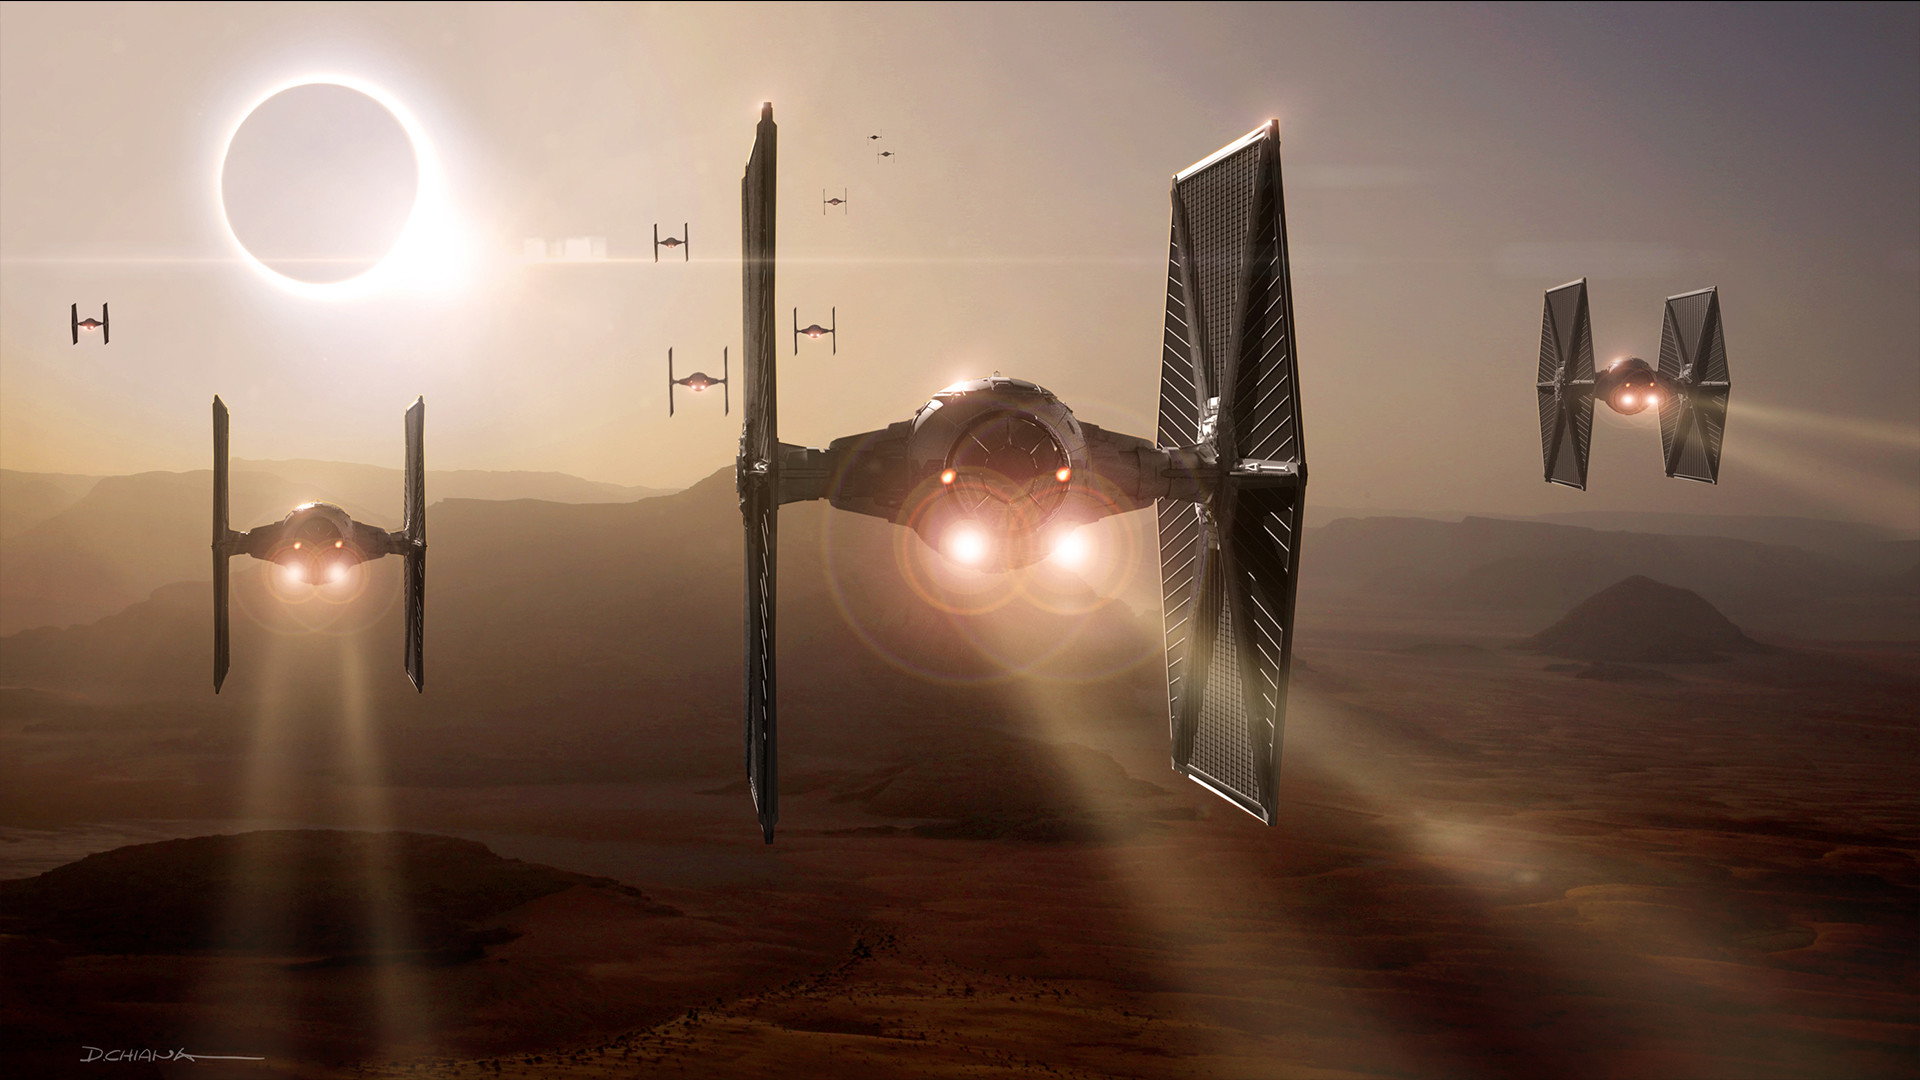 1920x1080 Star Wars The Force Awakens Concept Art Image #19